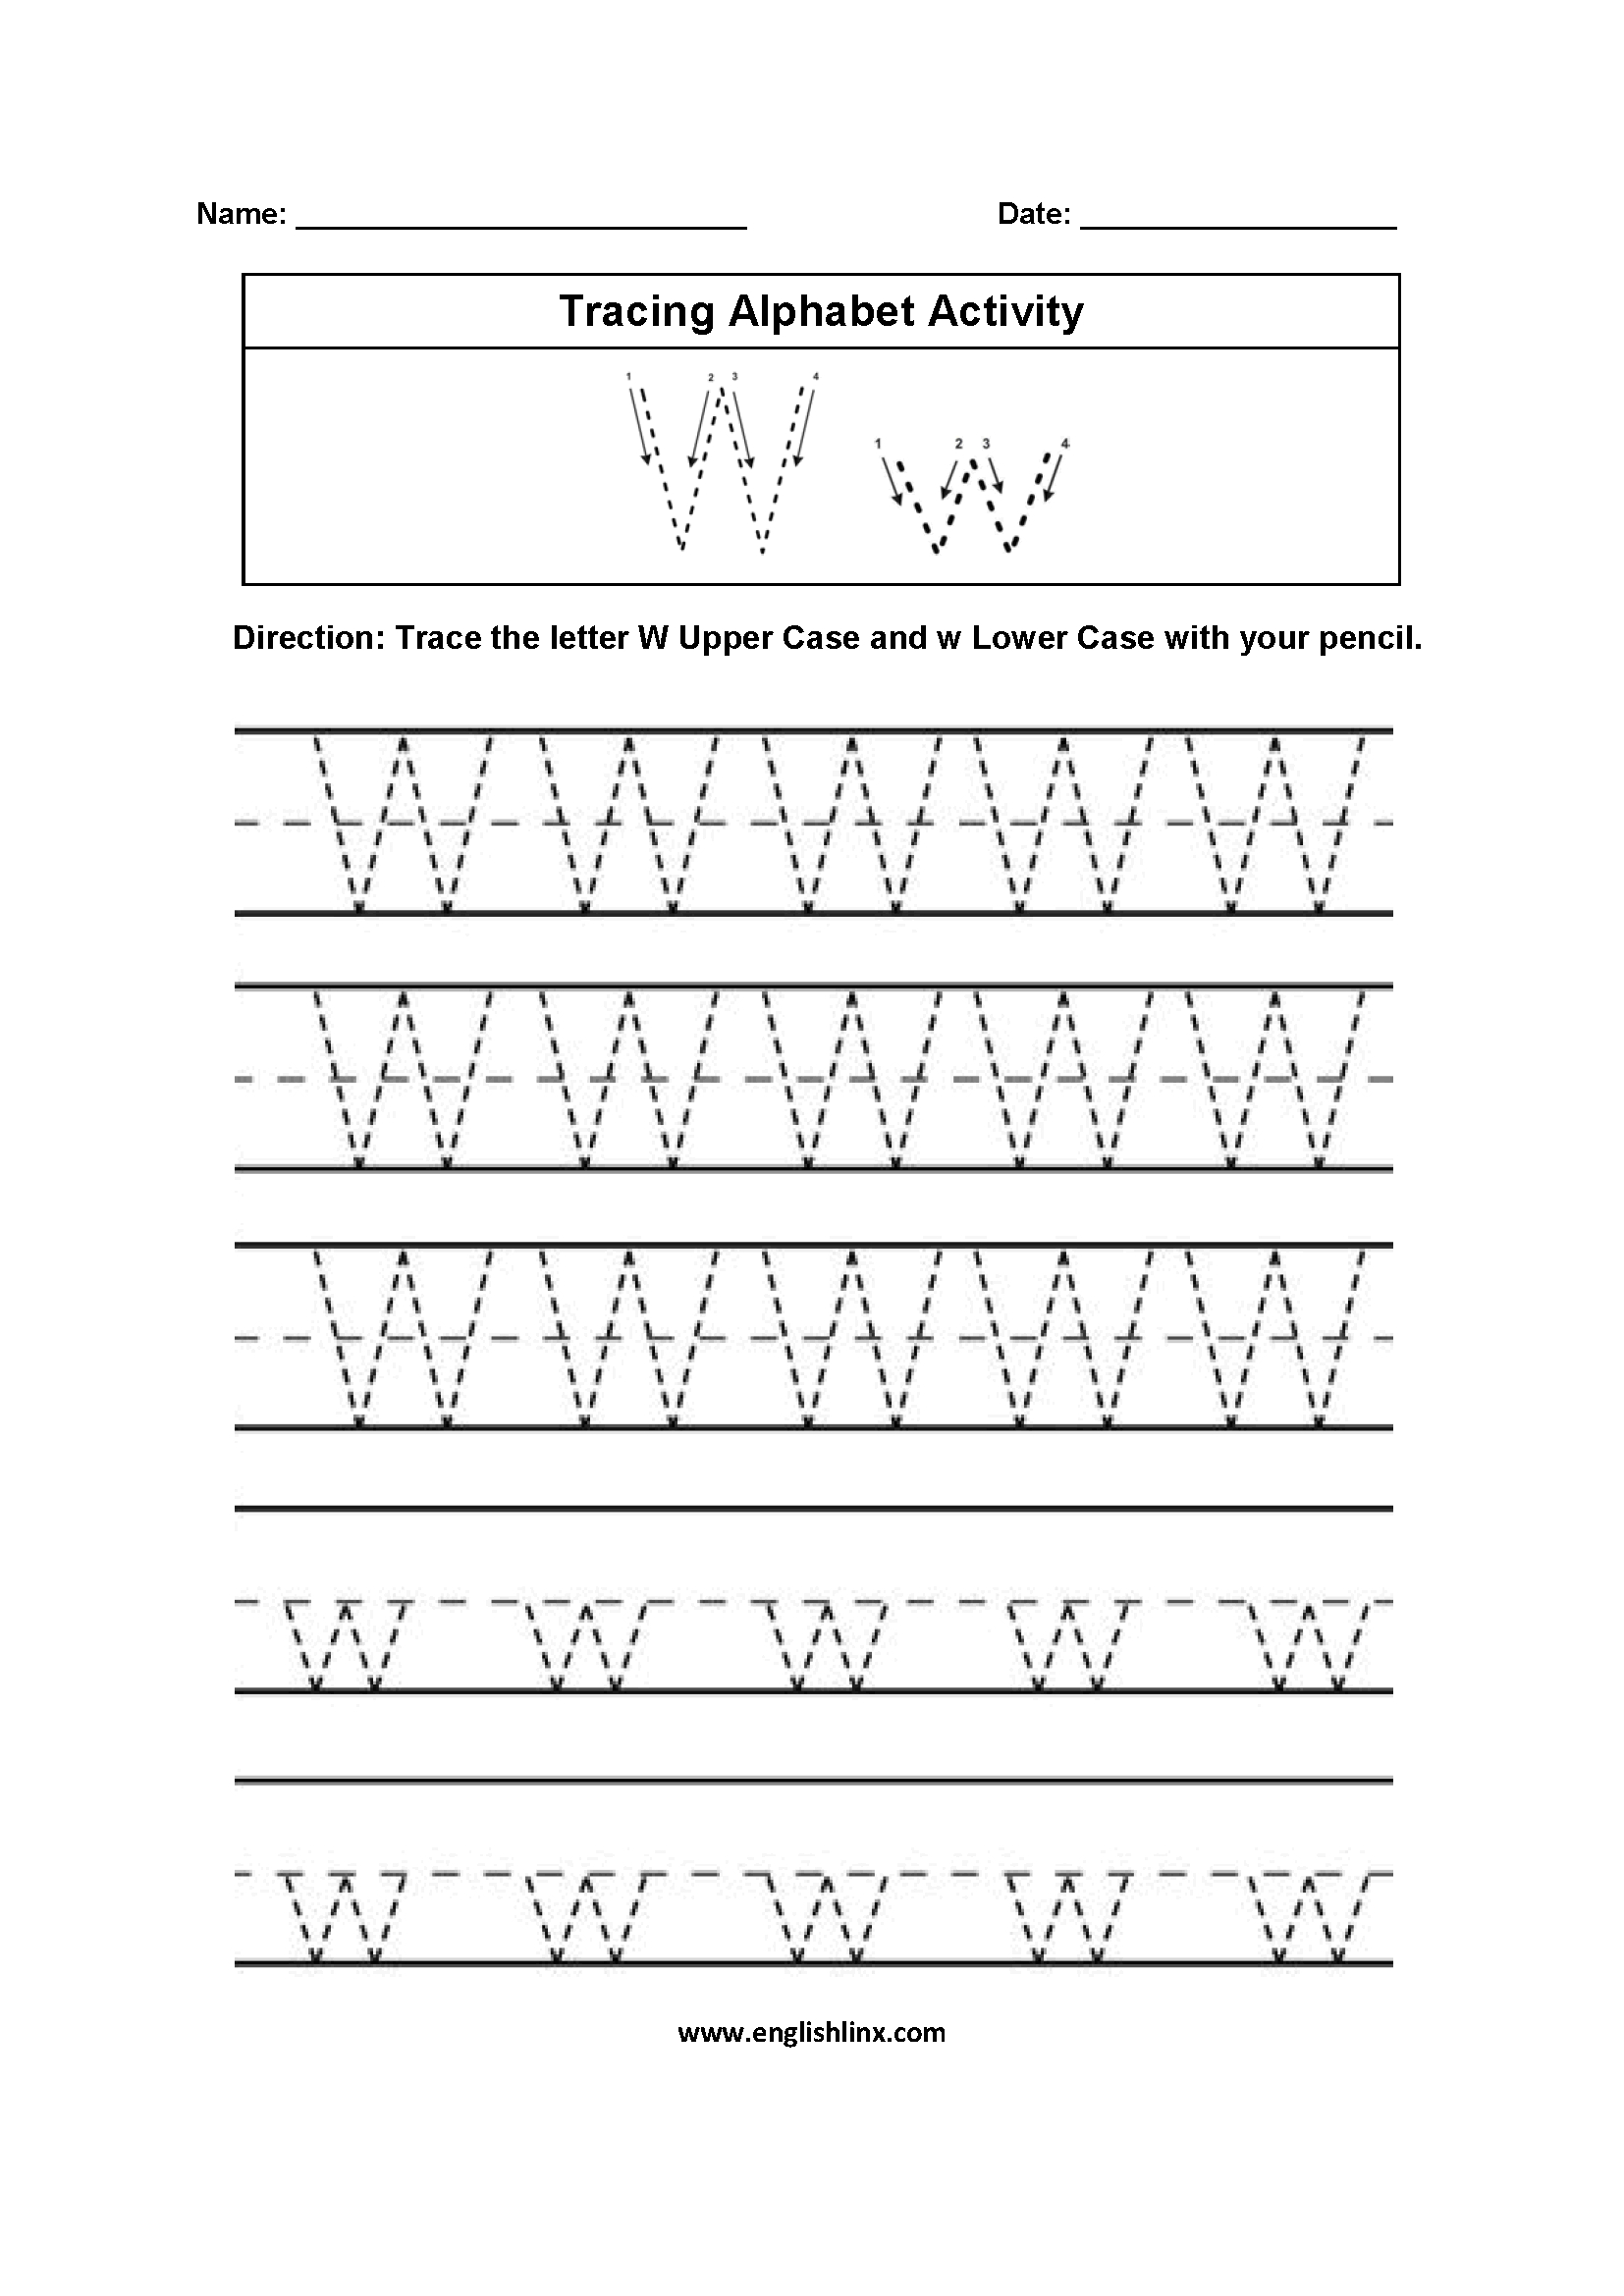 Color Pages ~ Make Your Own Free Name Tracing Worksheets pertaining to Tracing Letters Worksheets Make Your Own